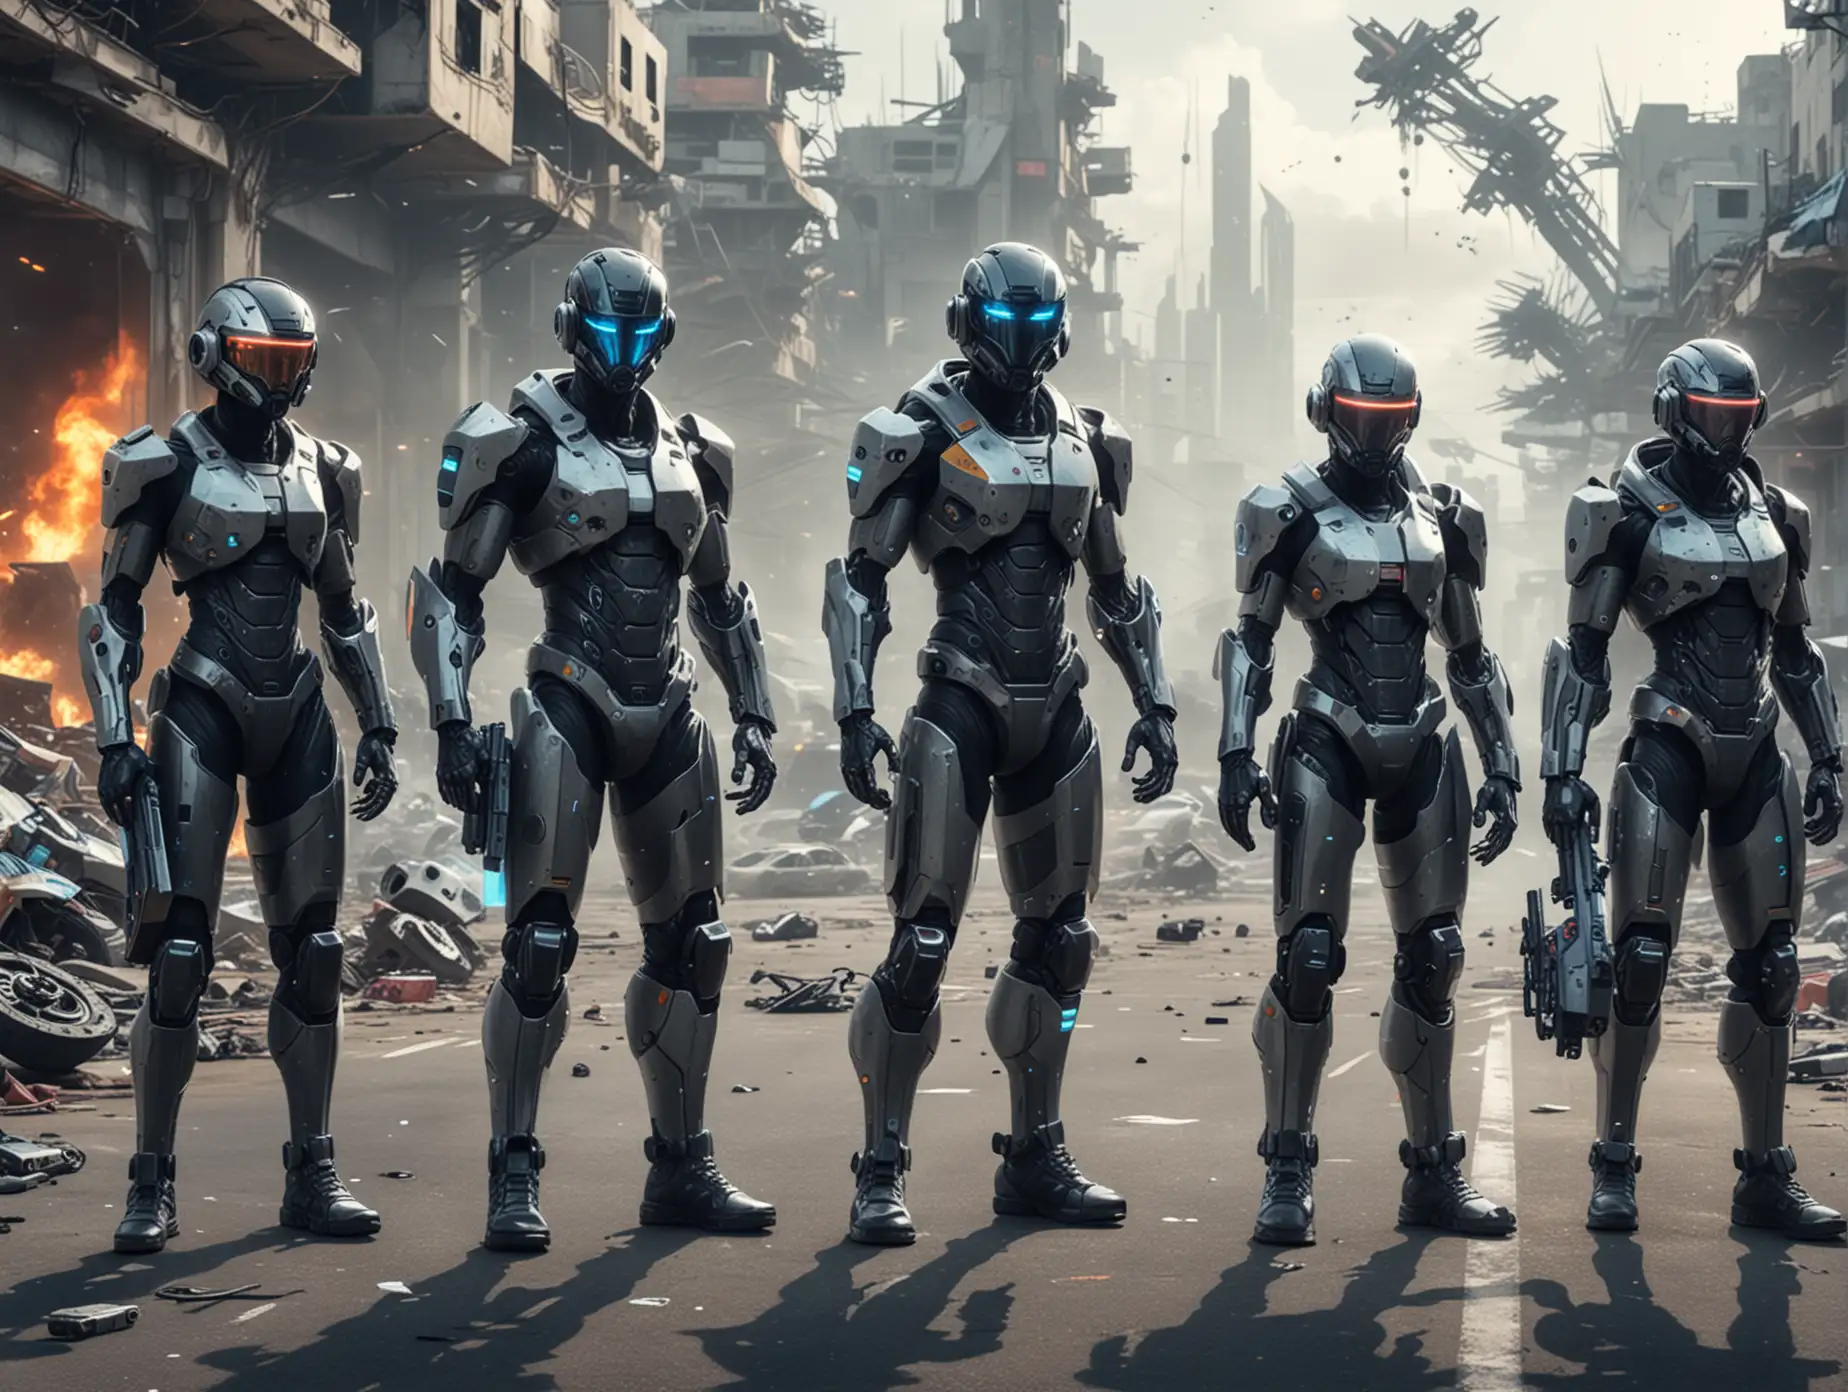 a futuristic group of cyber-tech peoples with cyber mobiles and remote controls in their hands, and equipped with cyber helmets.
 In the background a hyperfuturistic destroyed city and many futuristic vehicles like motorbikes, skateboards, spaceships and drones.